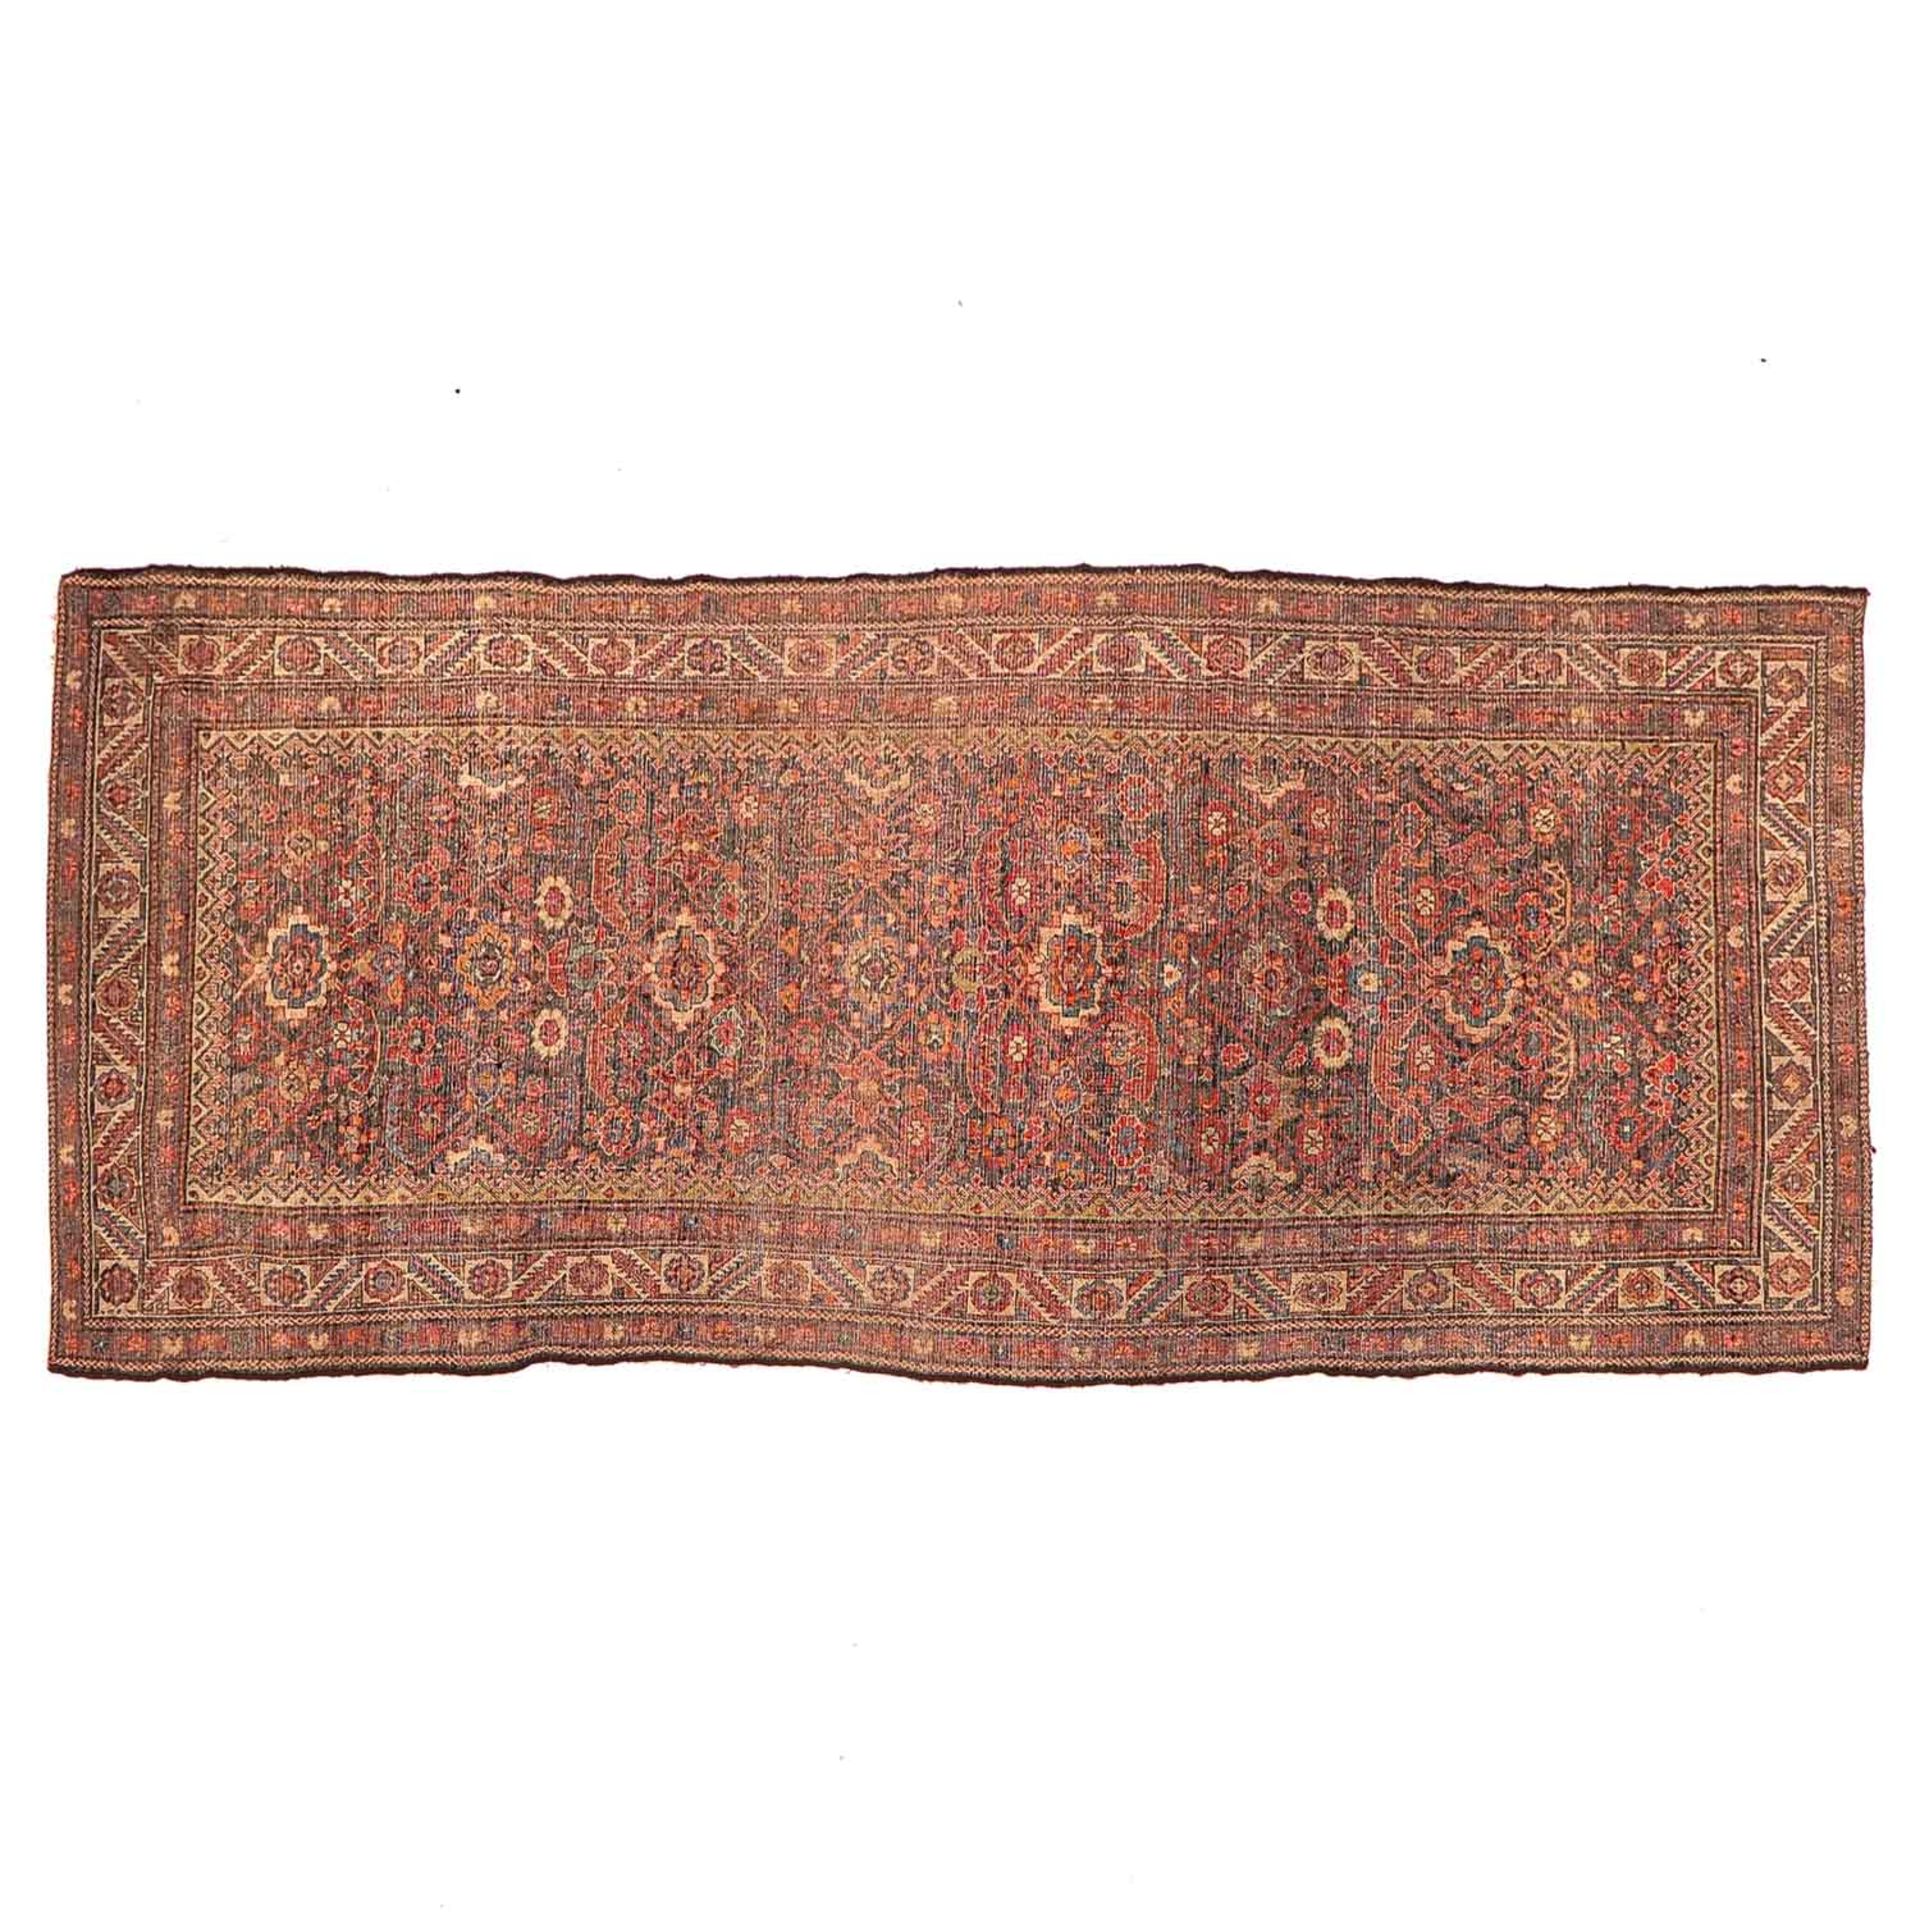 A Collection of 4 Persian Carpets - Image 9 of 9